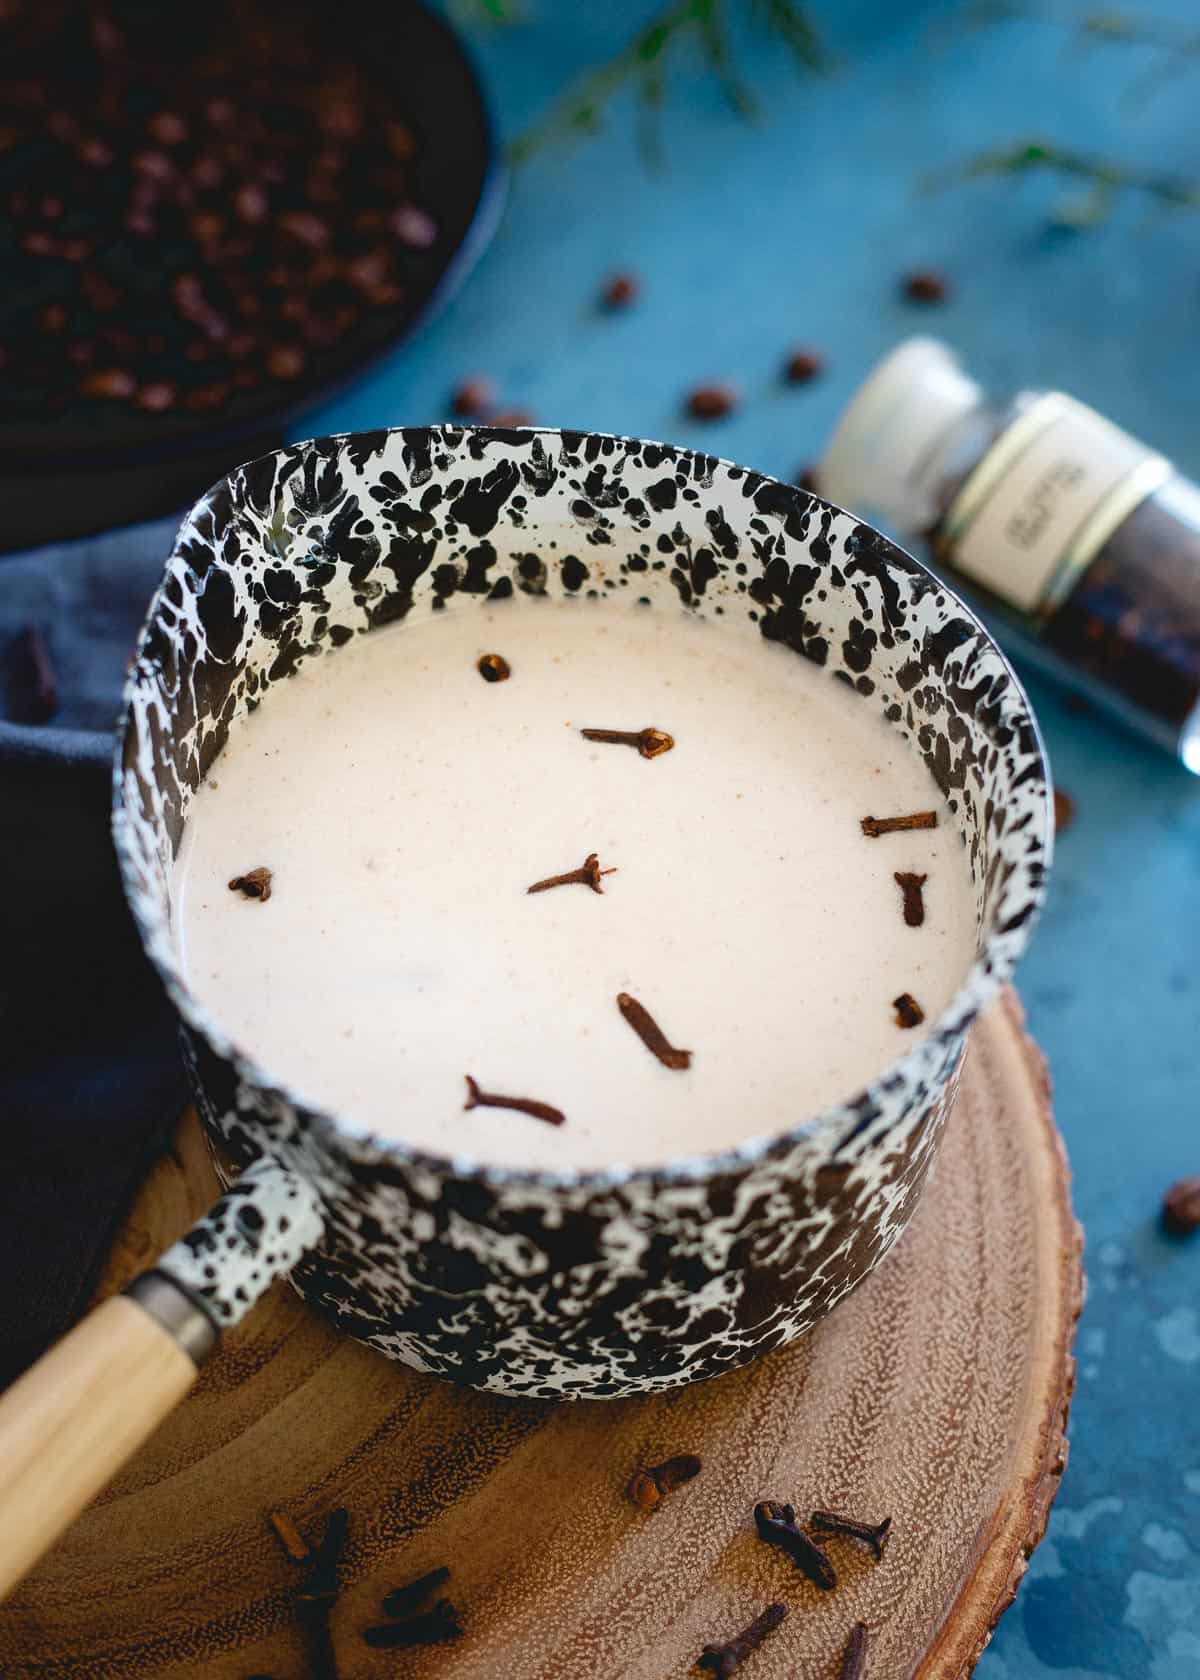 Spiced coconut milk makes the perfect cozy winter addition to some bourbon and coffee for this festive drink!